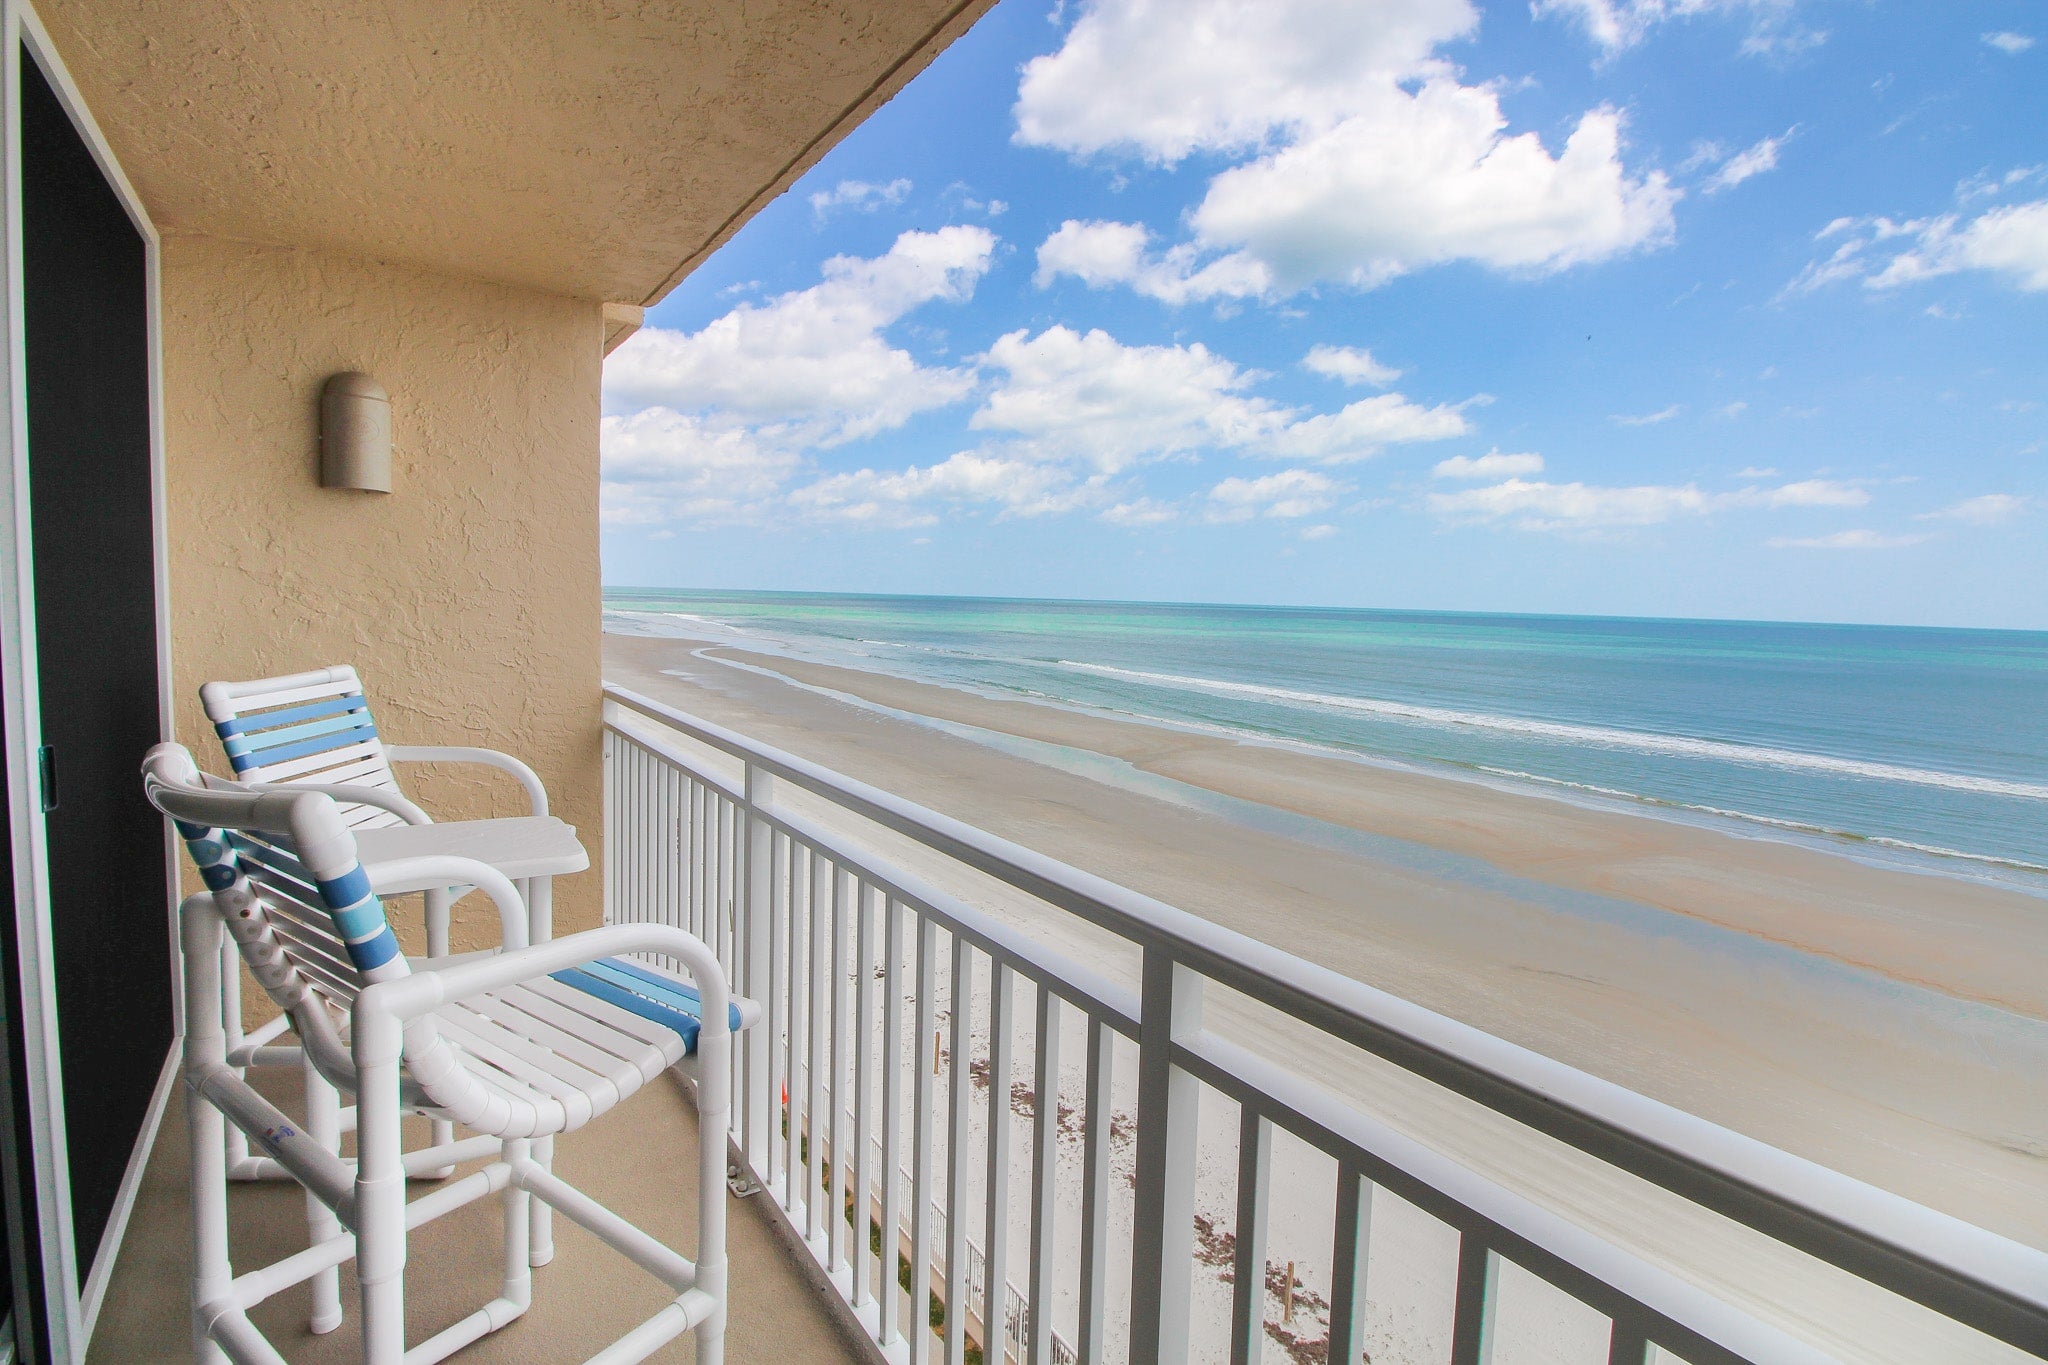 Awe-inspiring oceanfront view from living room balcony